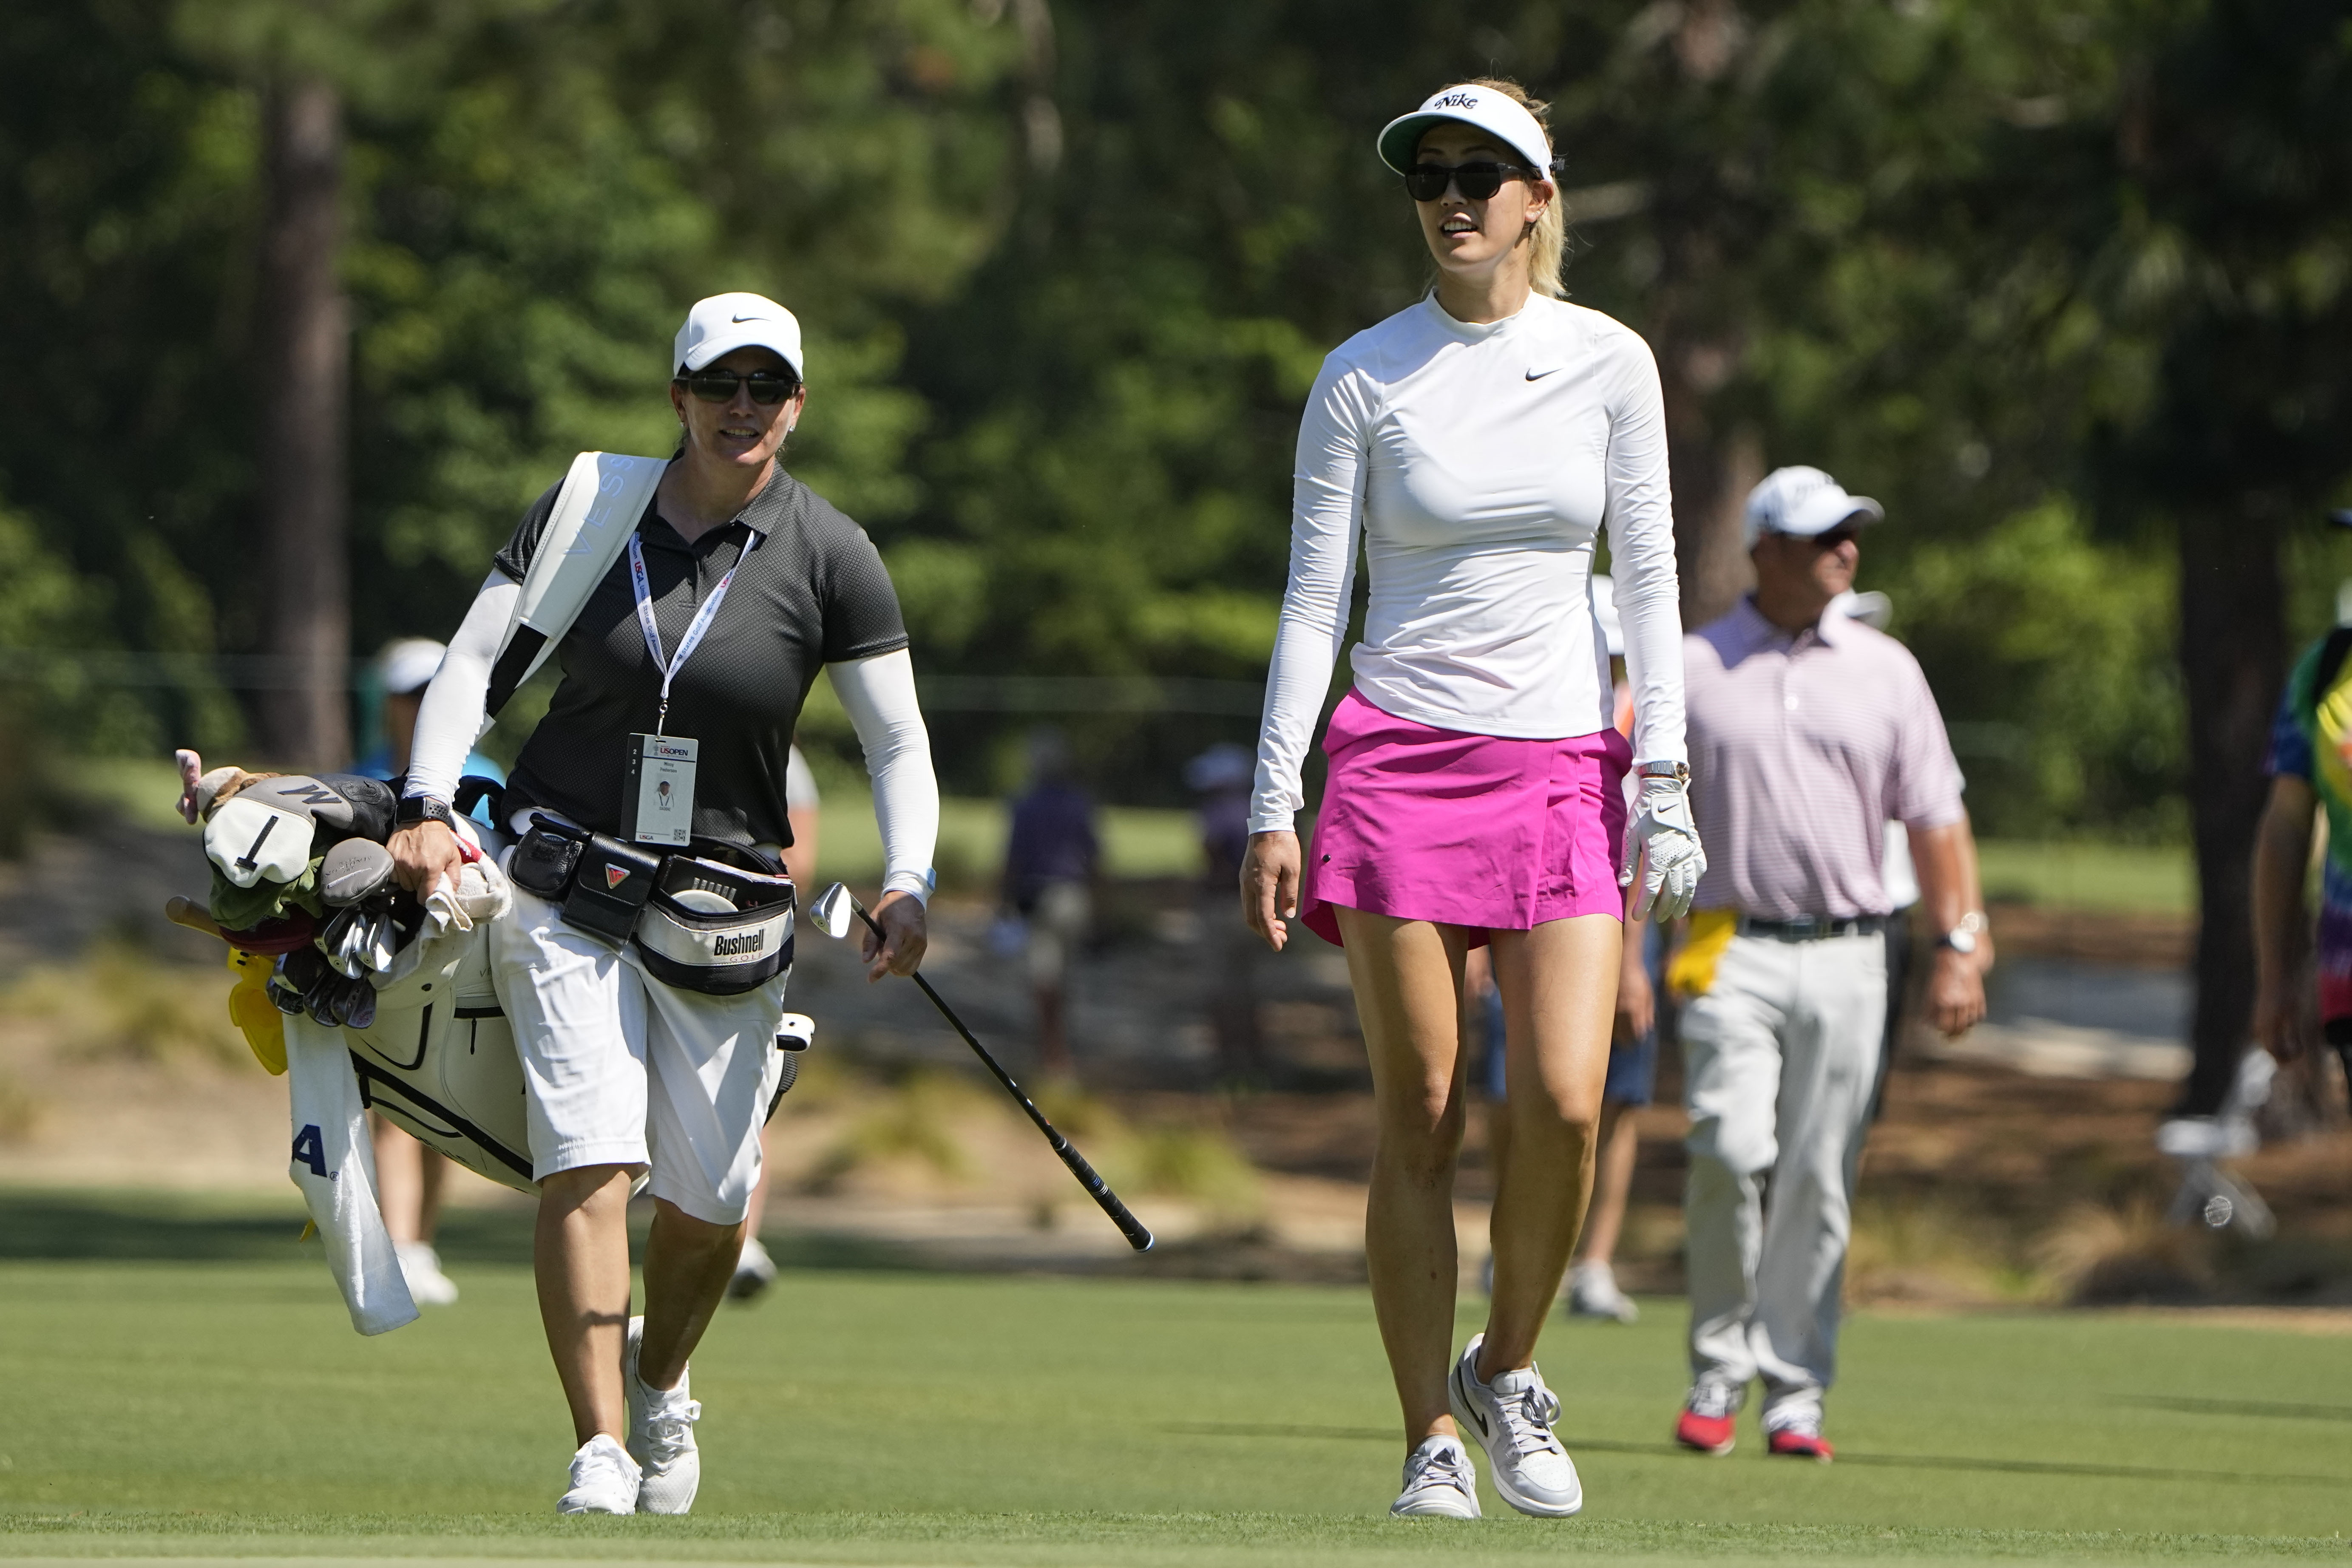 Michelle Wie West set for one last stroll down memory lane at US Womens Open